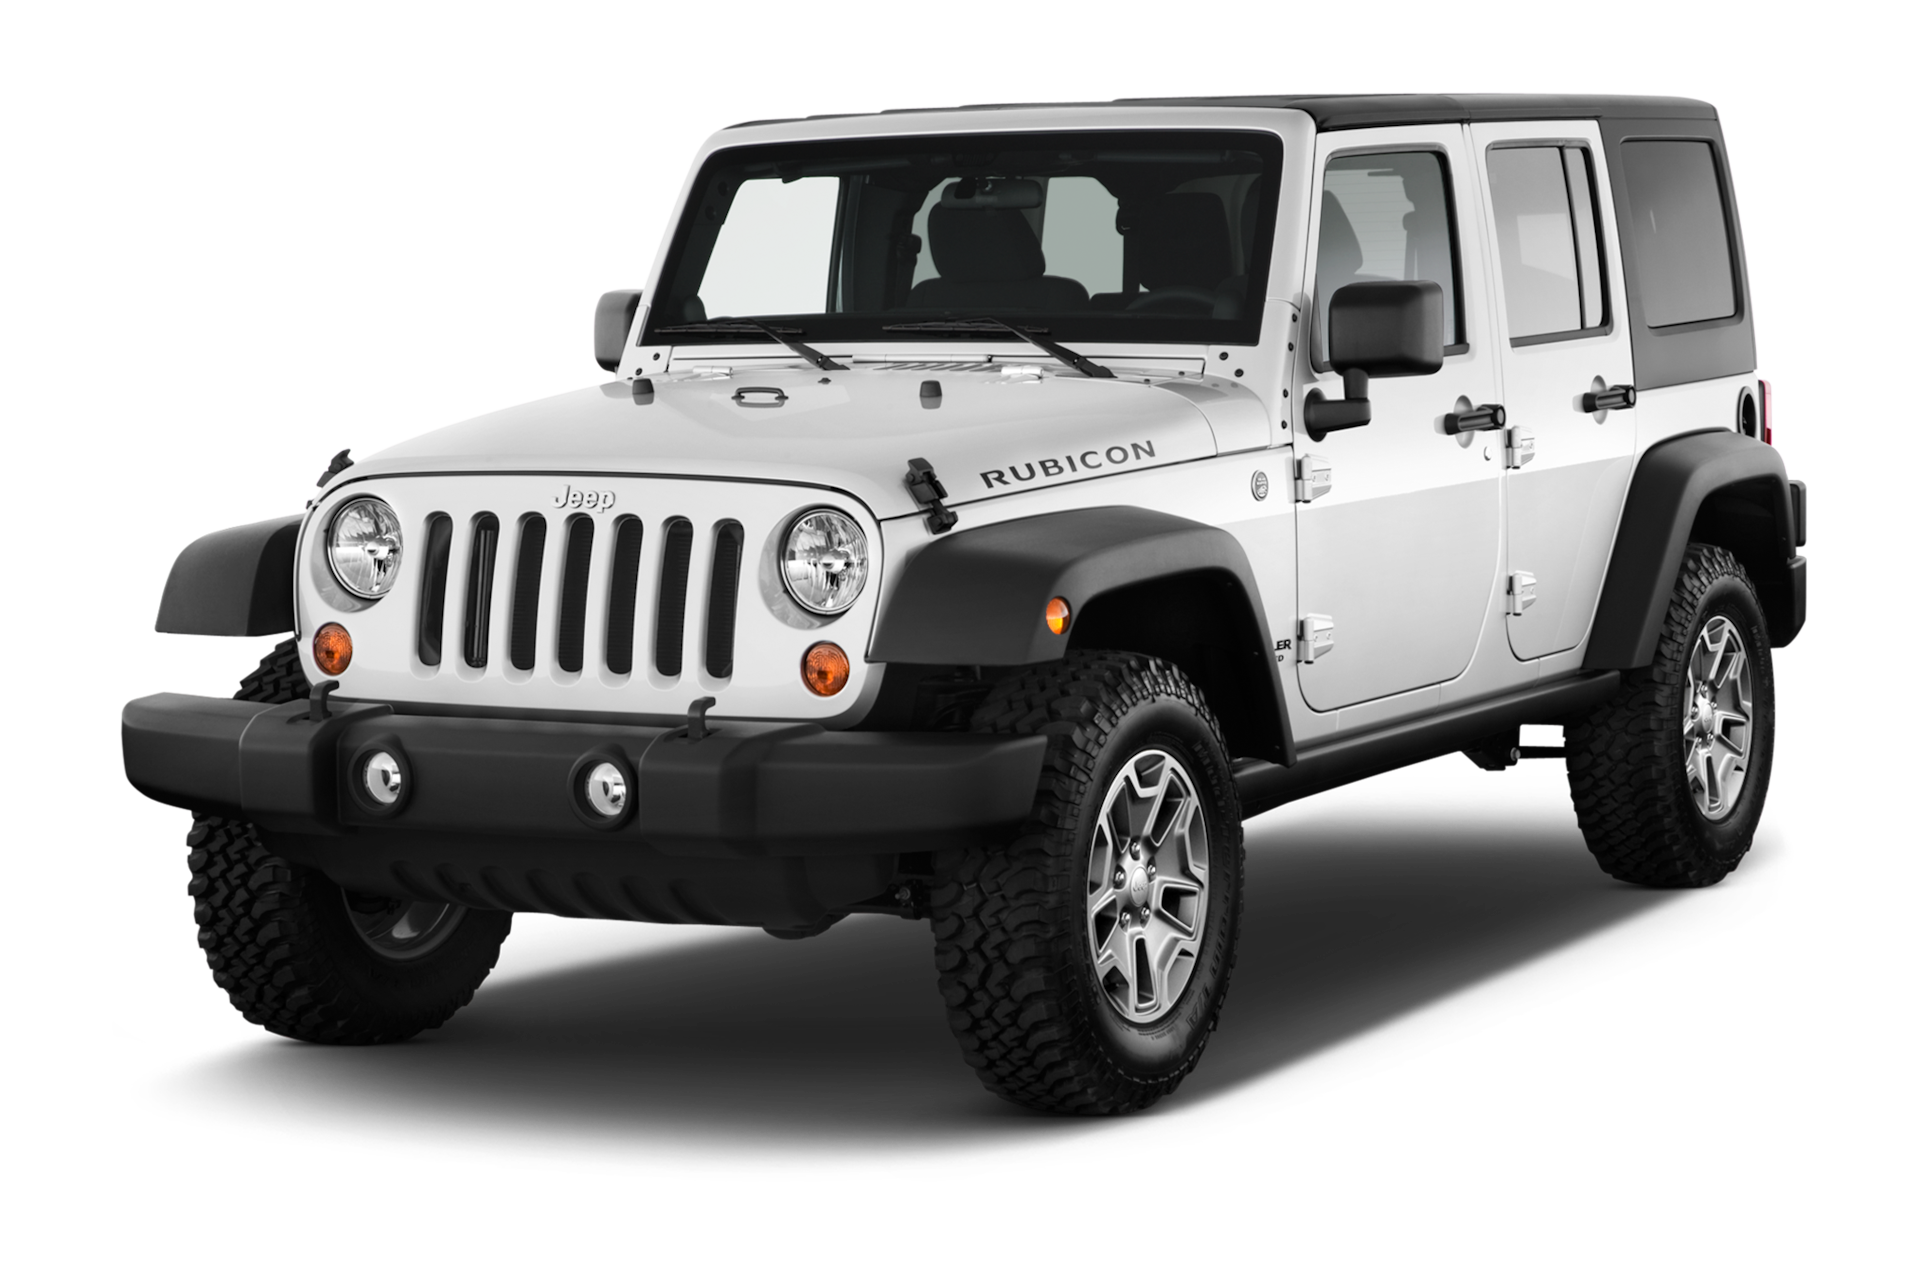 2013 Jeep Wrangler Unlimited Prices, Reviews, and Photos - MotorTrend